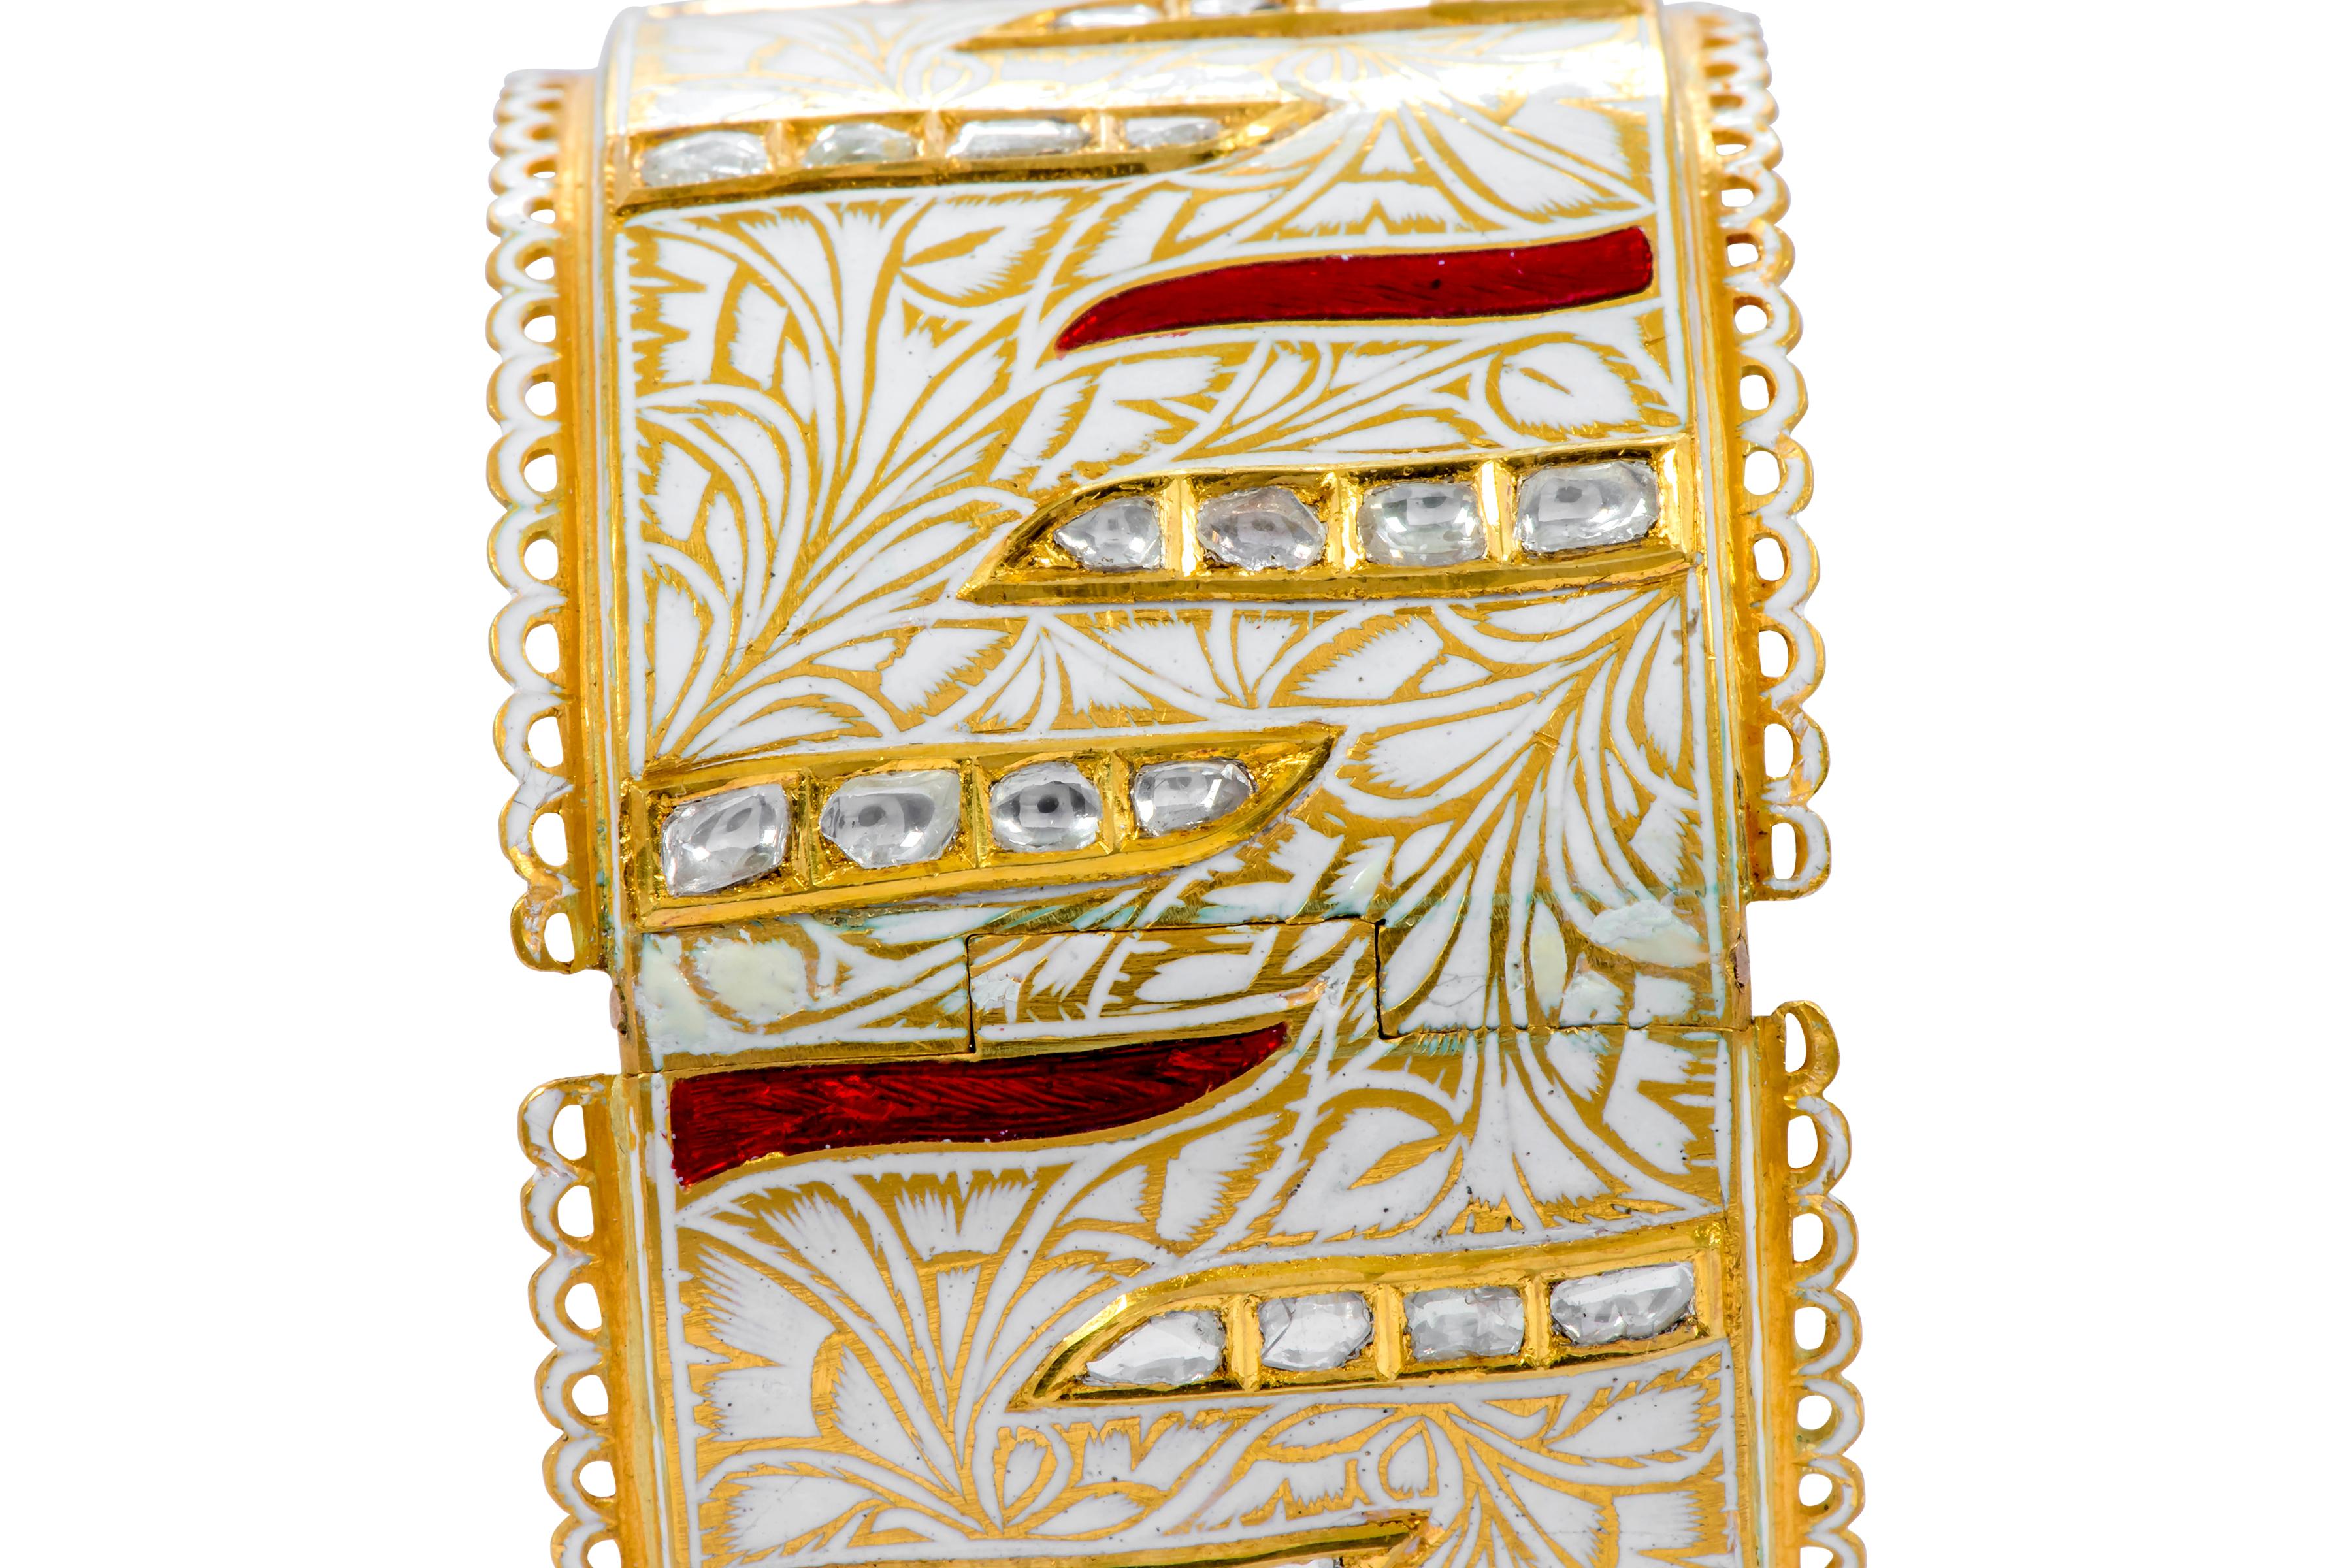 22 Karat Yellow Gold Diamond, Red, and White Enamel Handcrafted Bangle 

This exuberant antiquated Mughal period hand-crafted white and gold enamel Polki diamond bangle is heavenly. The picturesque engraving of our beloved nature with leaves,